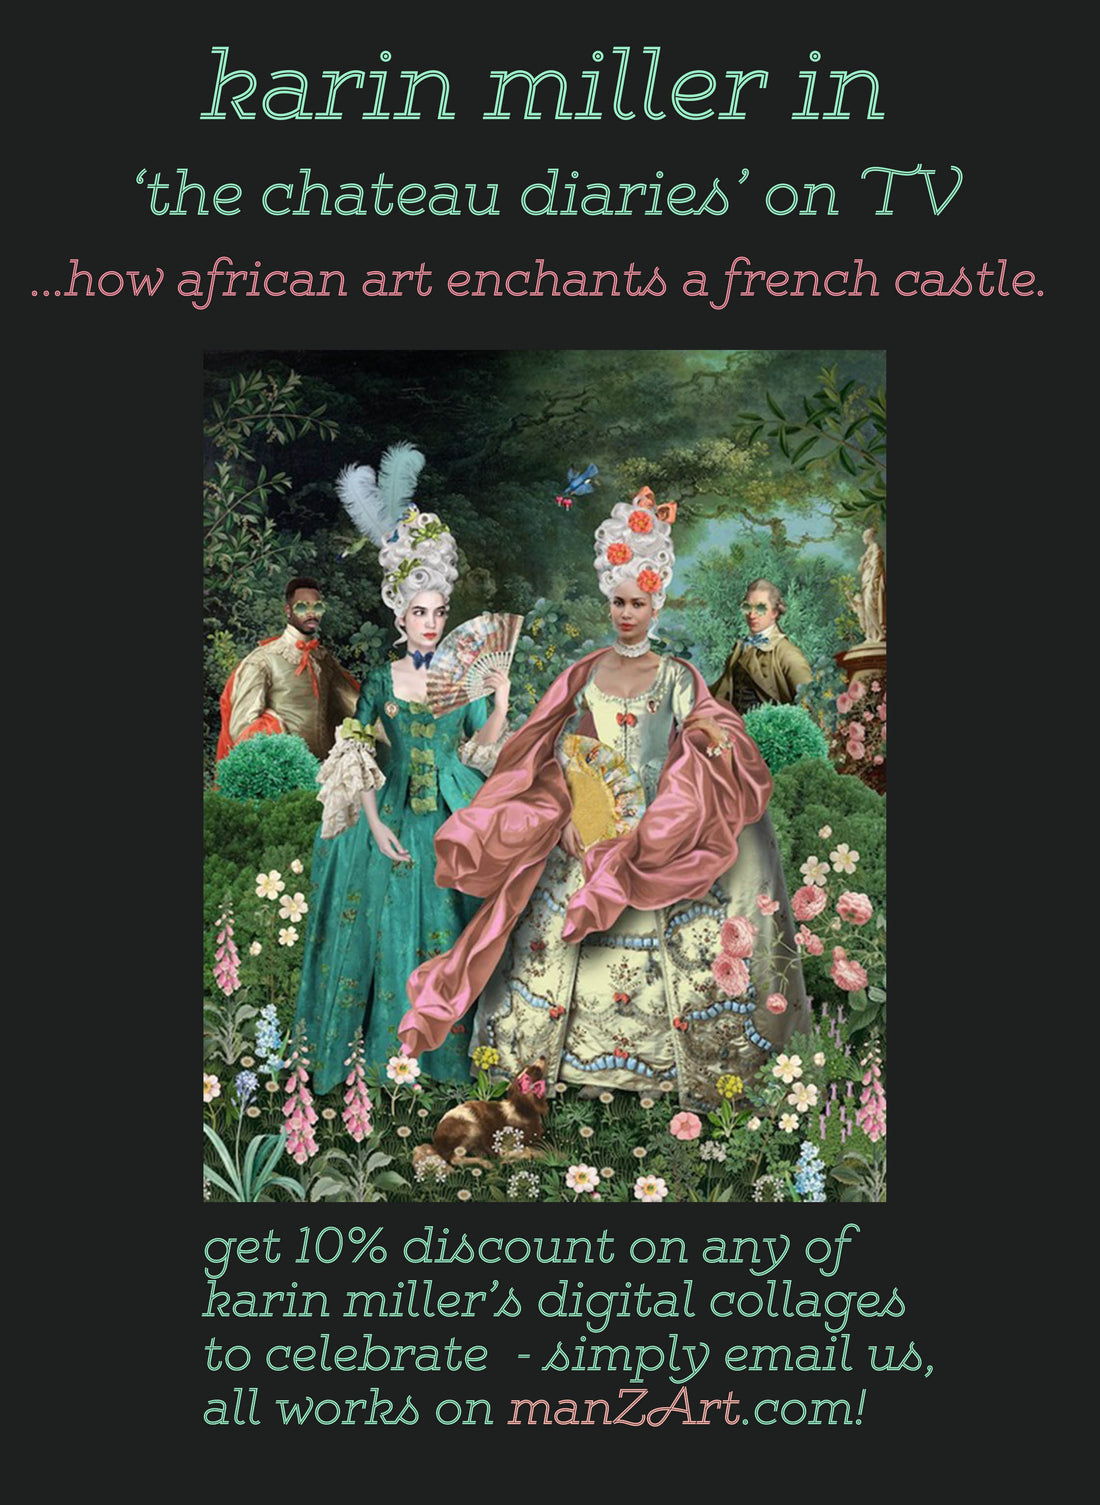 karin miller in 'the chateau diaries' on TV - how an african artist enchants a french castle....